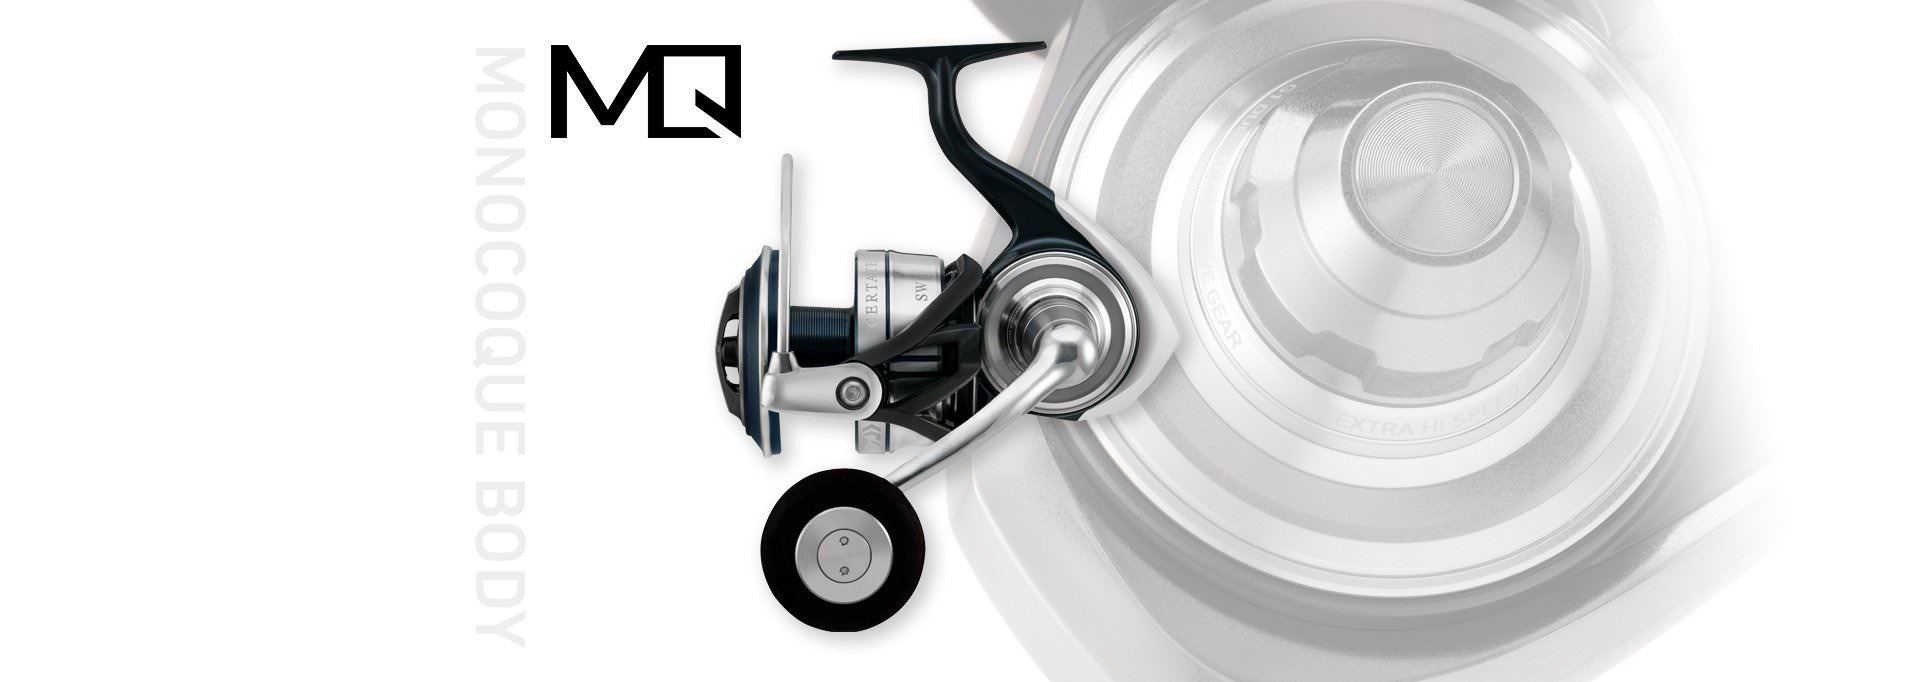 Daiwa 2021 Certate SW Spin Reels + Gift